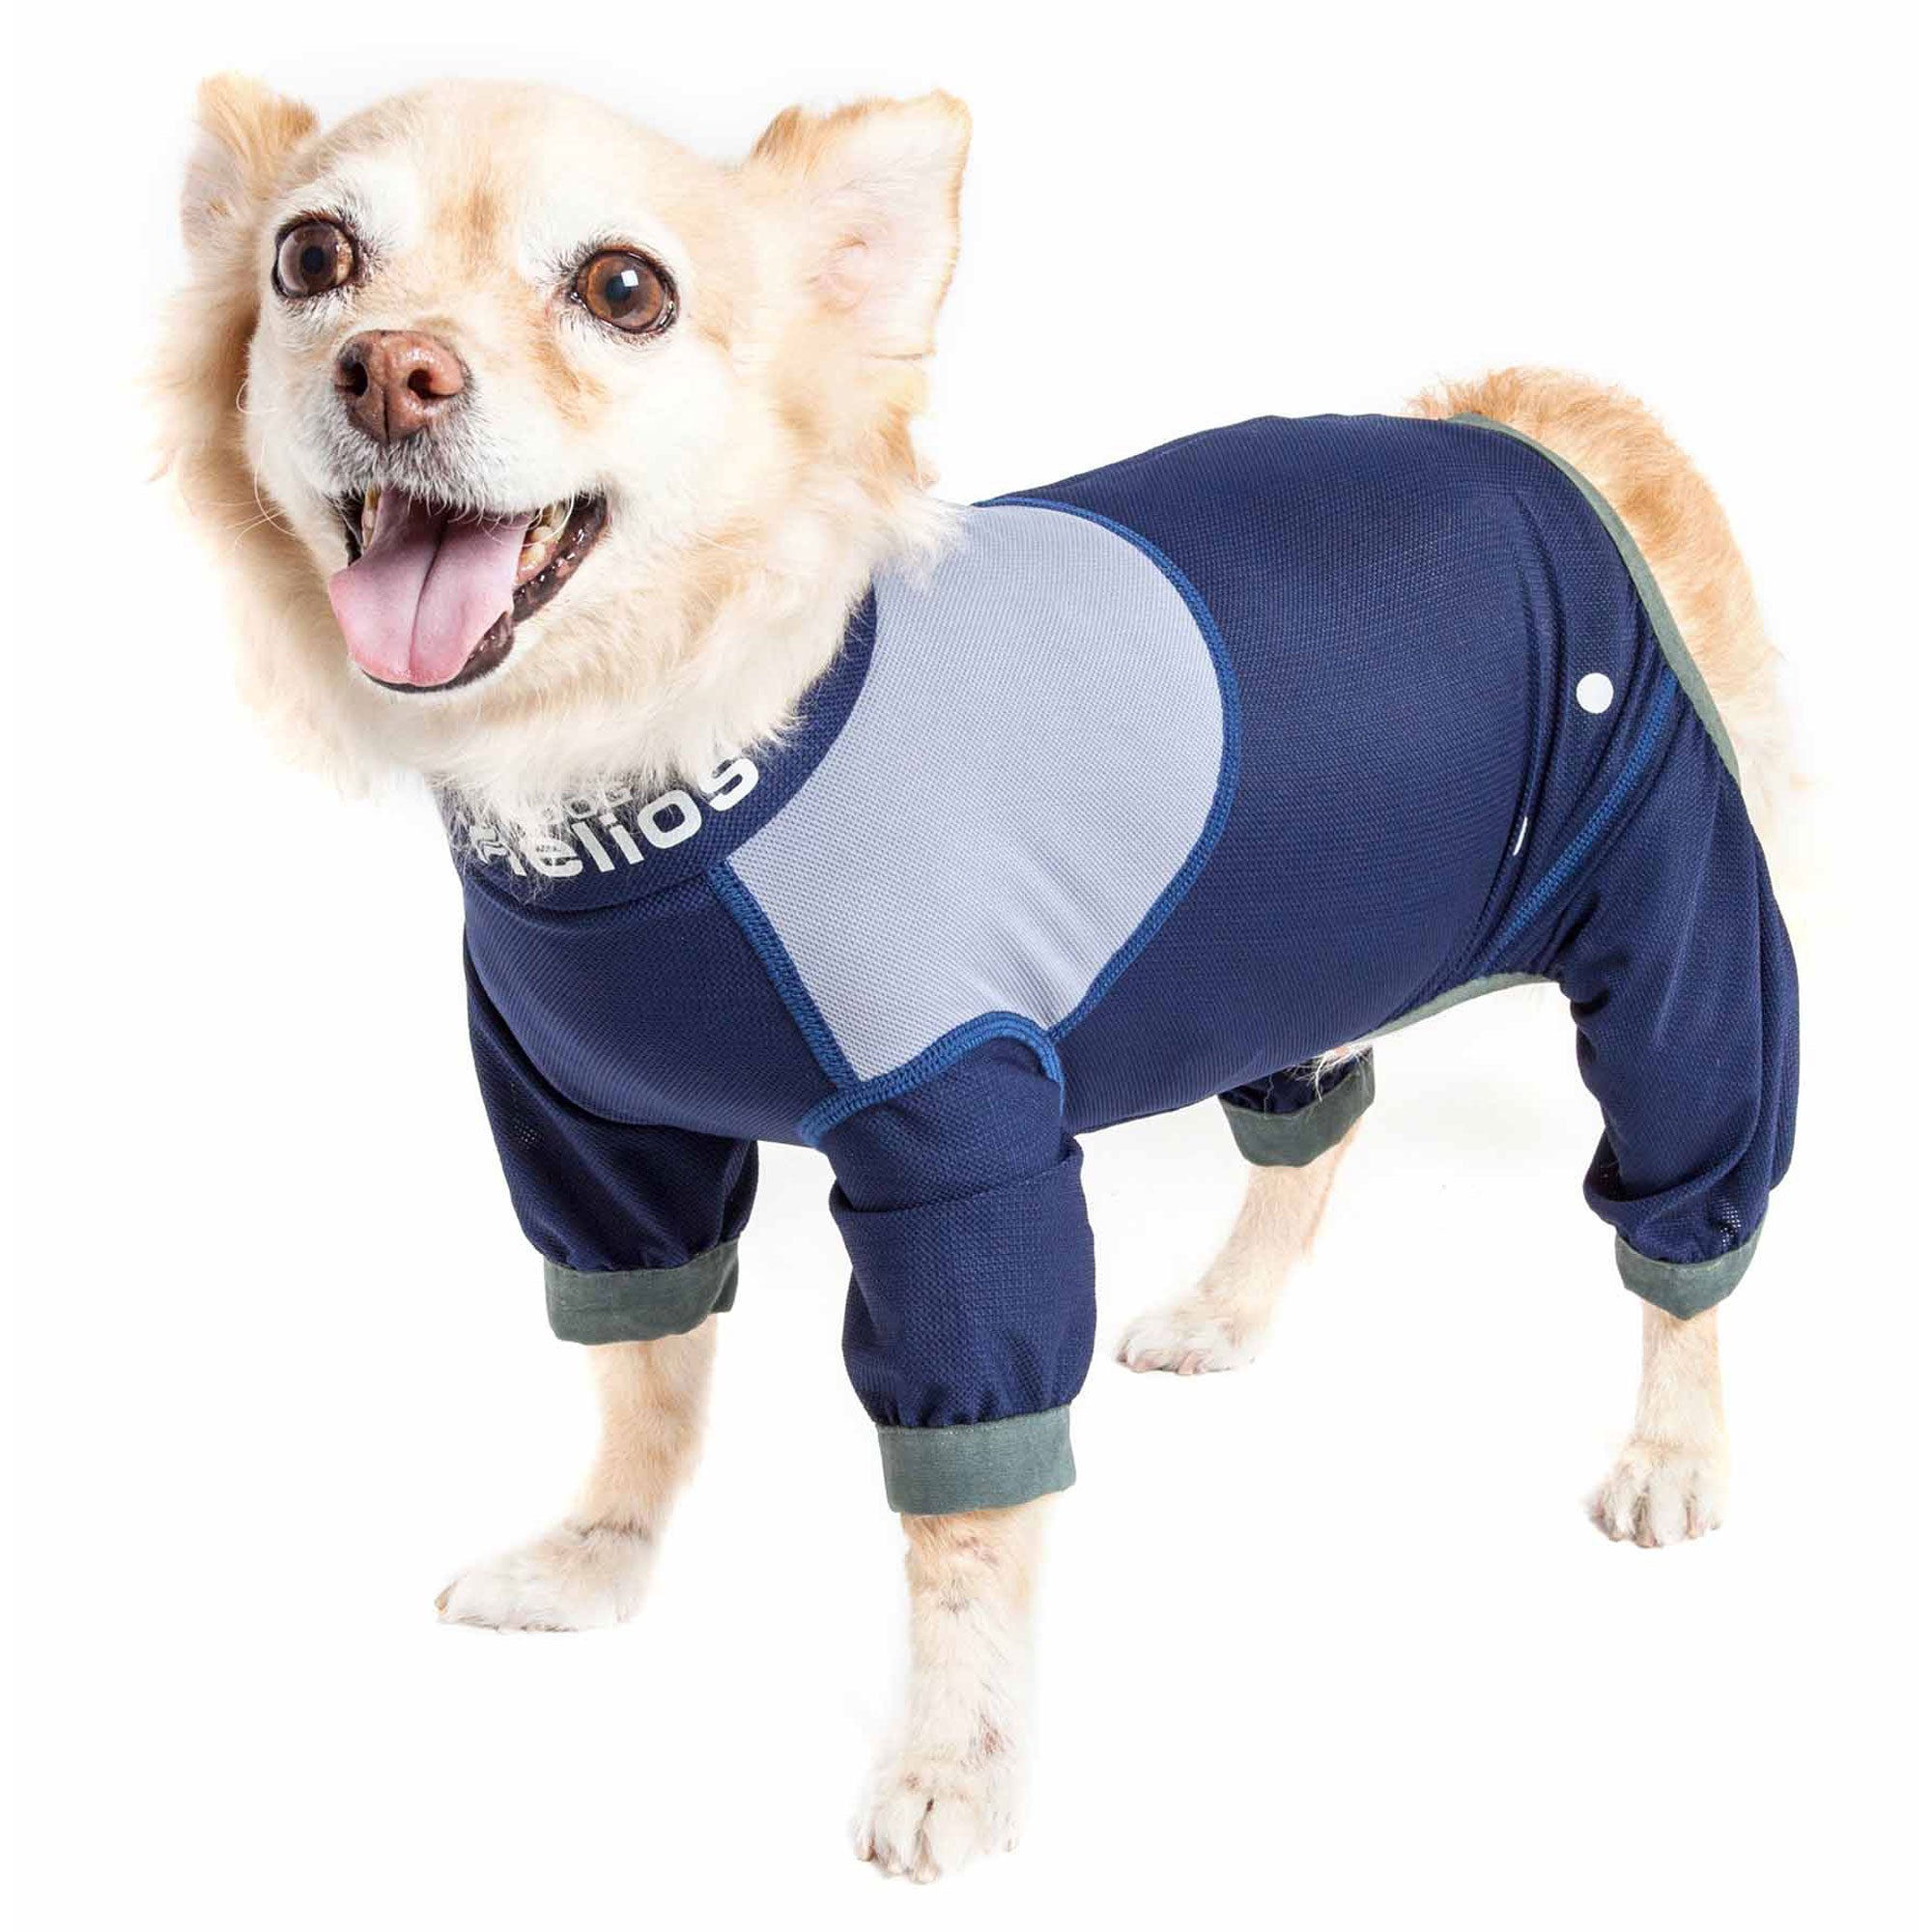 Dog Helios® Tail Runner Dog Track Suit - Blue & Gray - X-Large